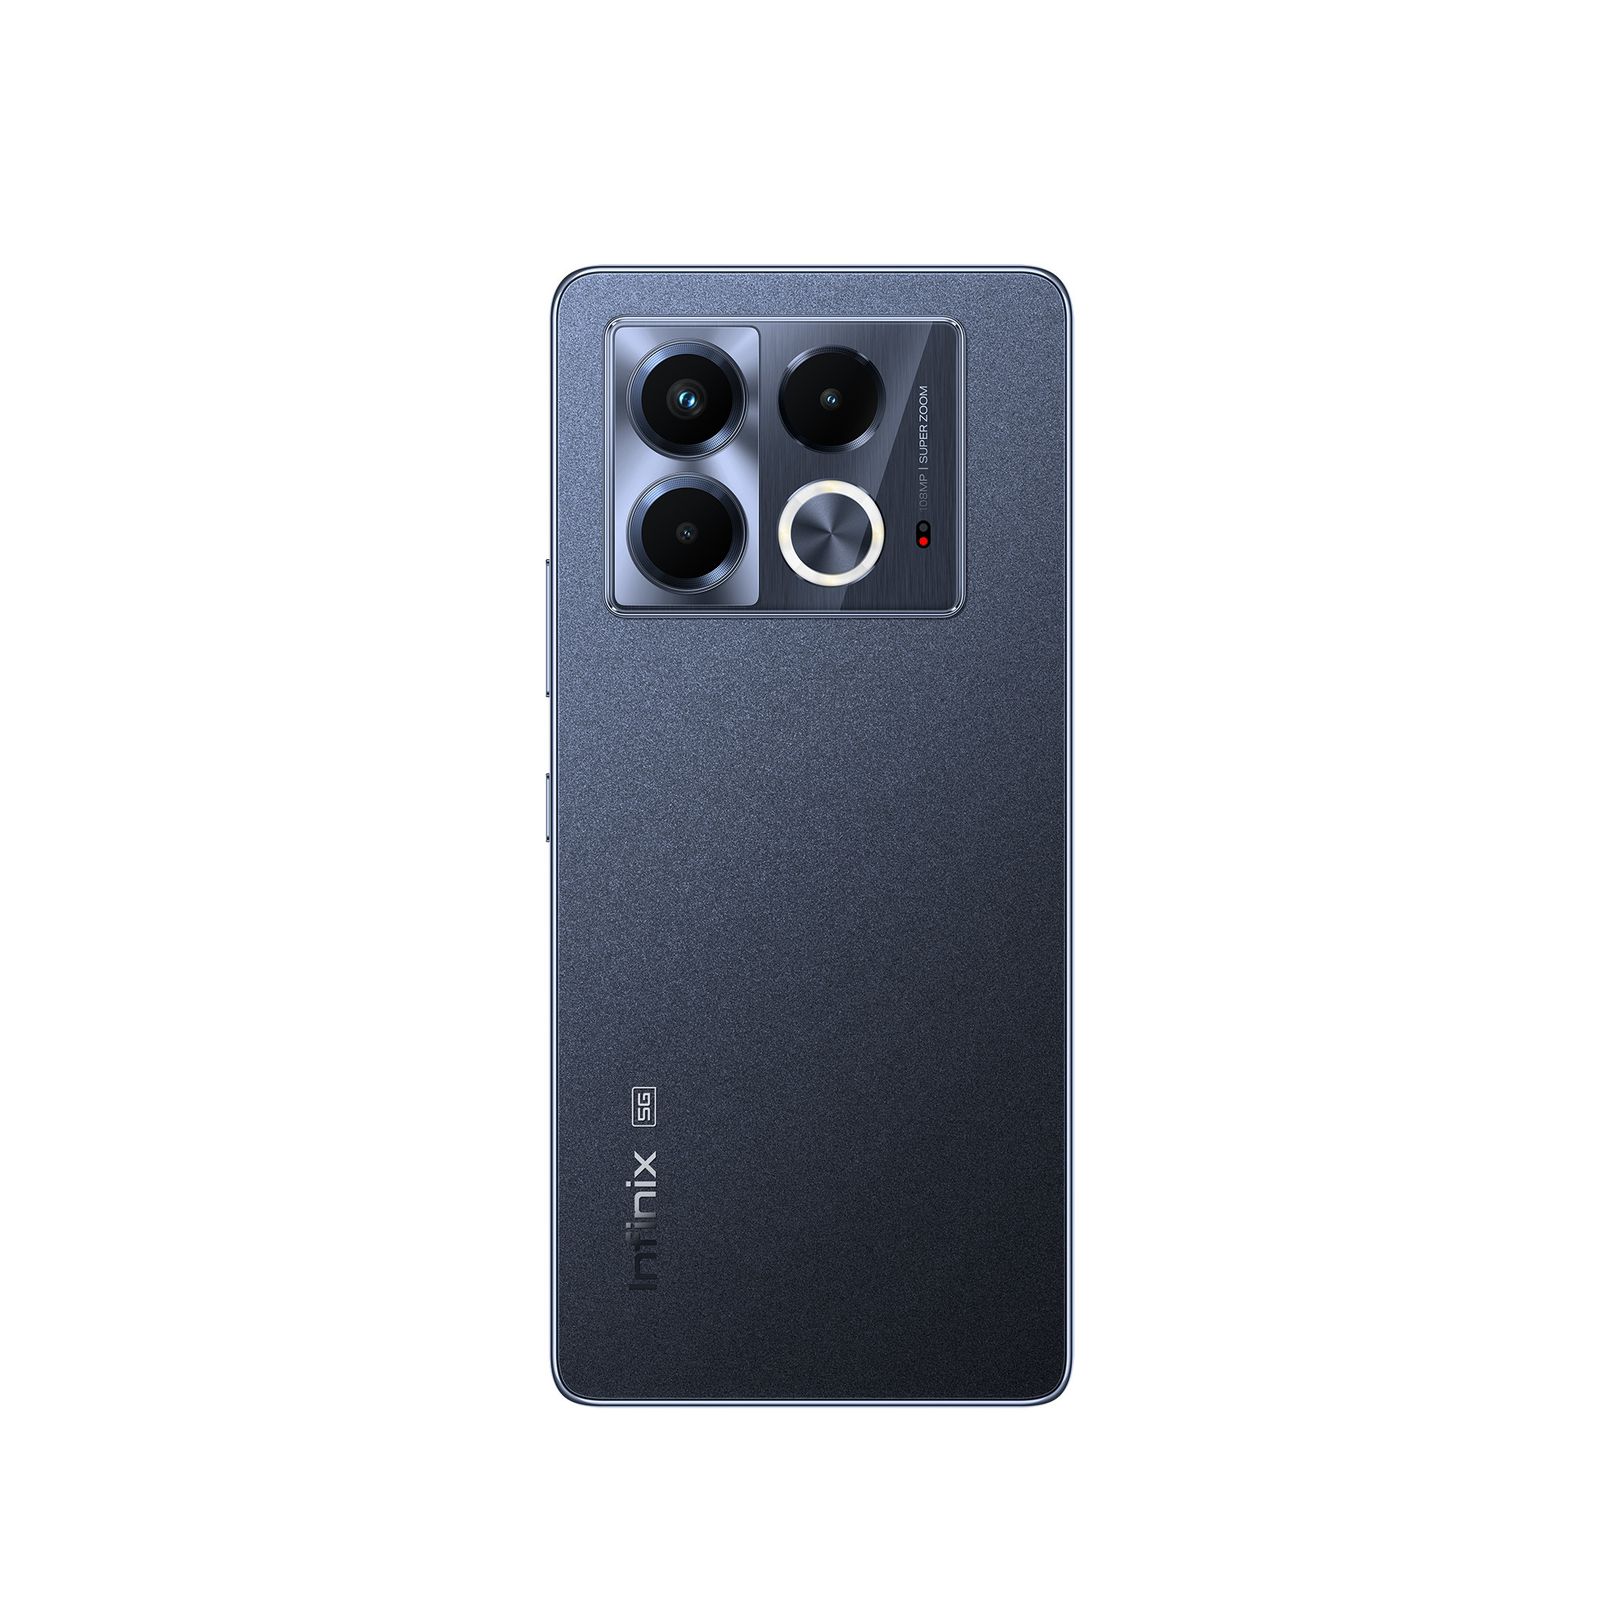 The phone has a 108MP camera with OIS, and 3x Lossless Superzoom & a 32MP front camera